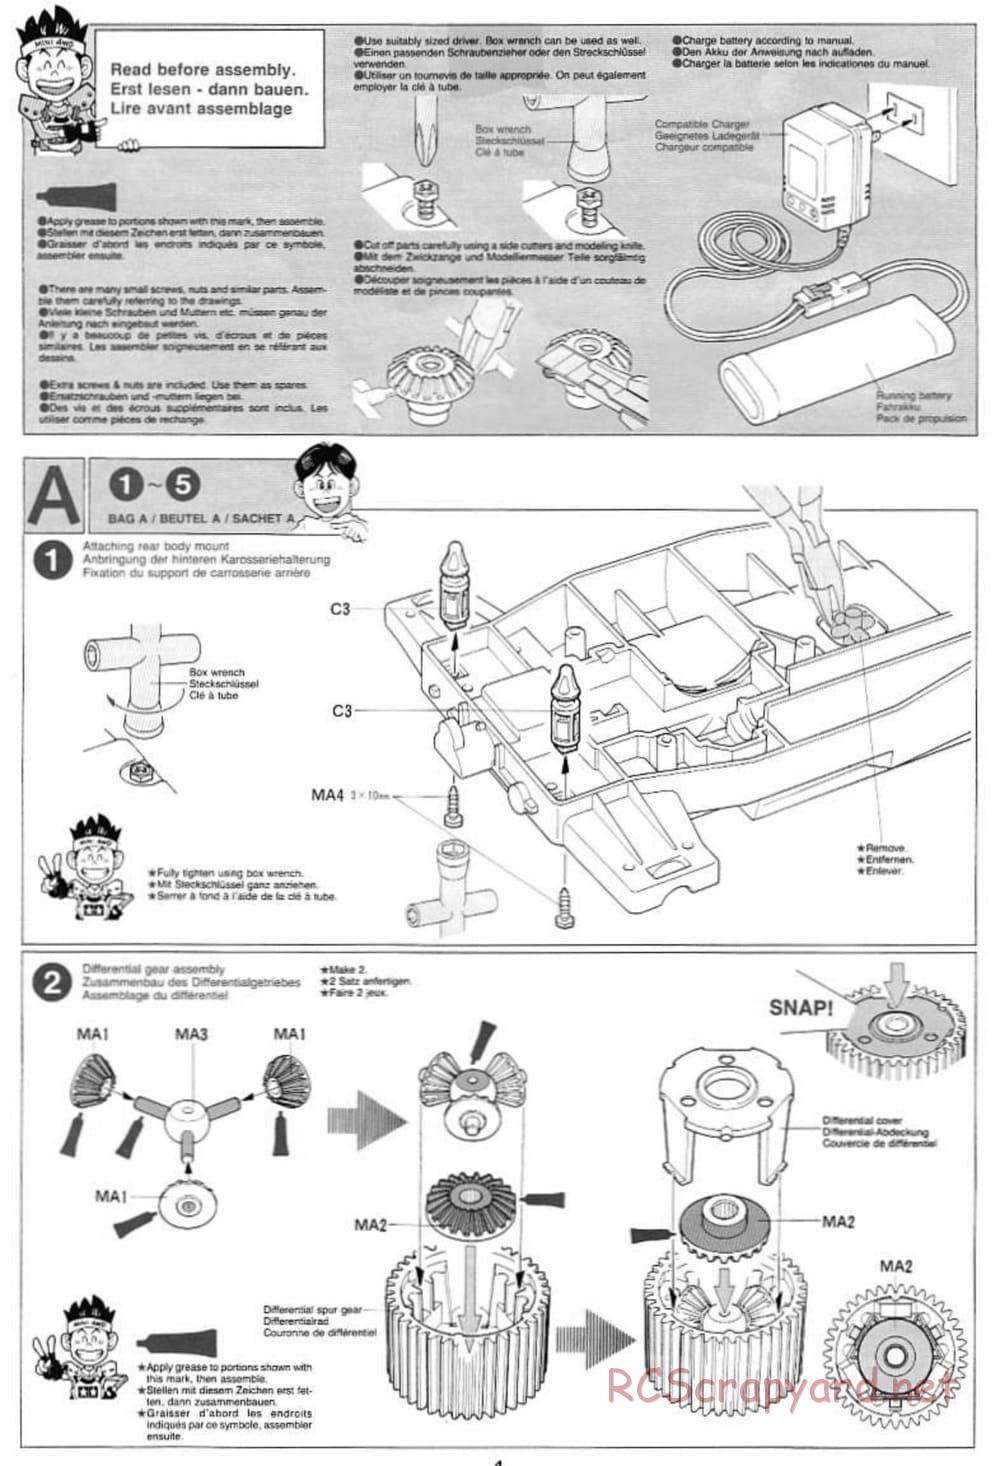 Tamiya - Wild Ceptor - Boy's 4WD Chassis - Manual - Page 4